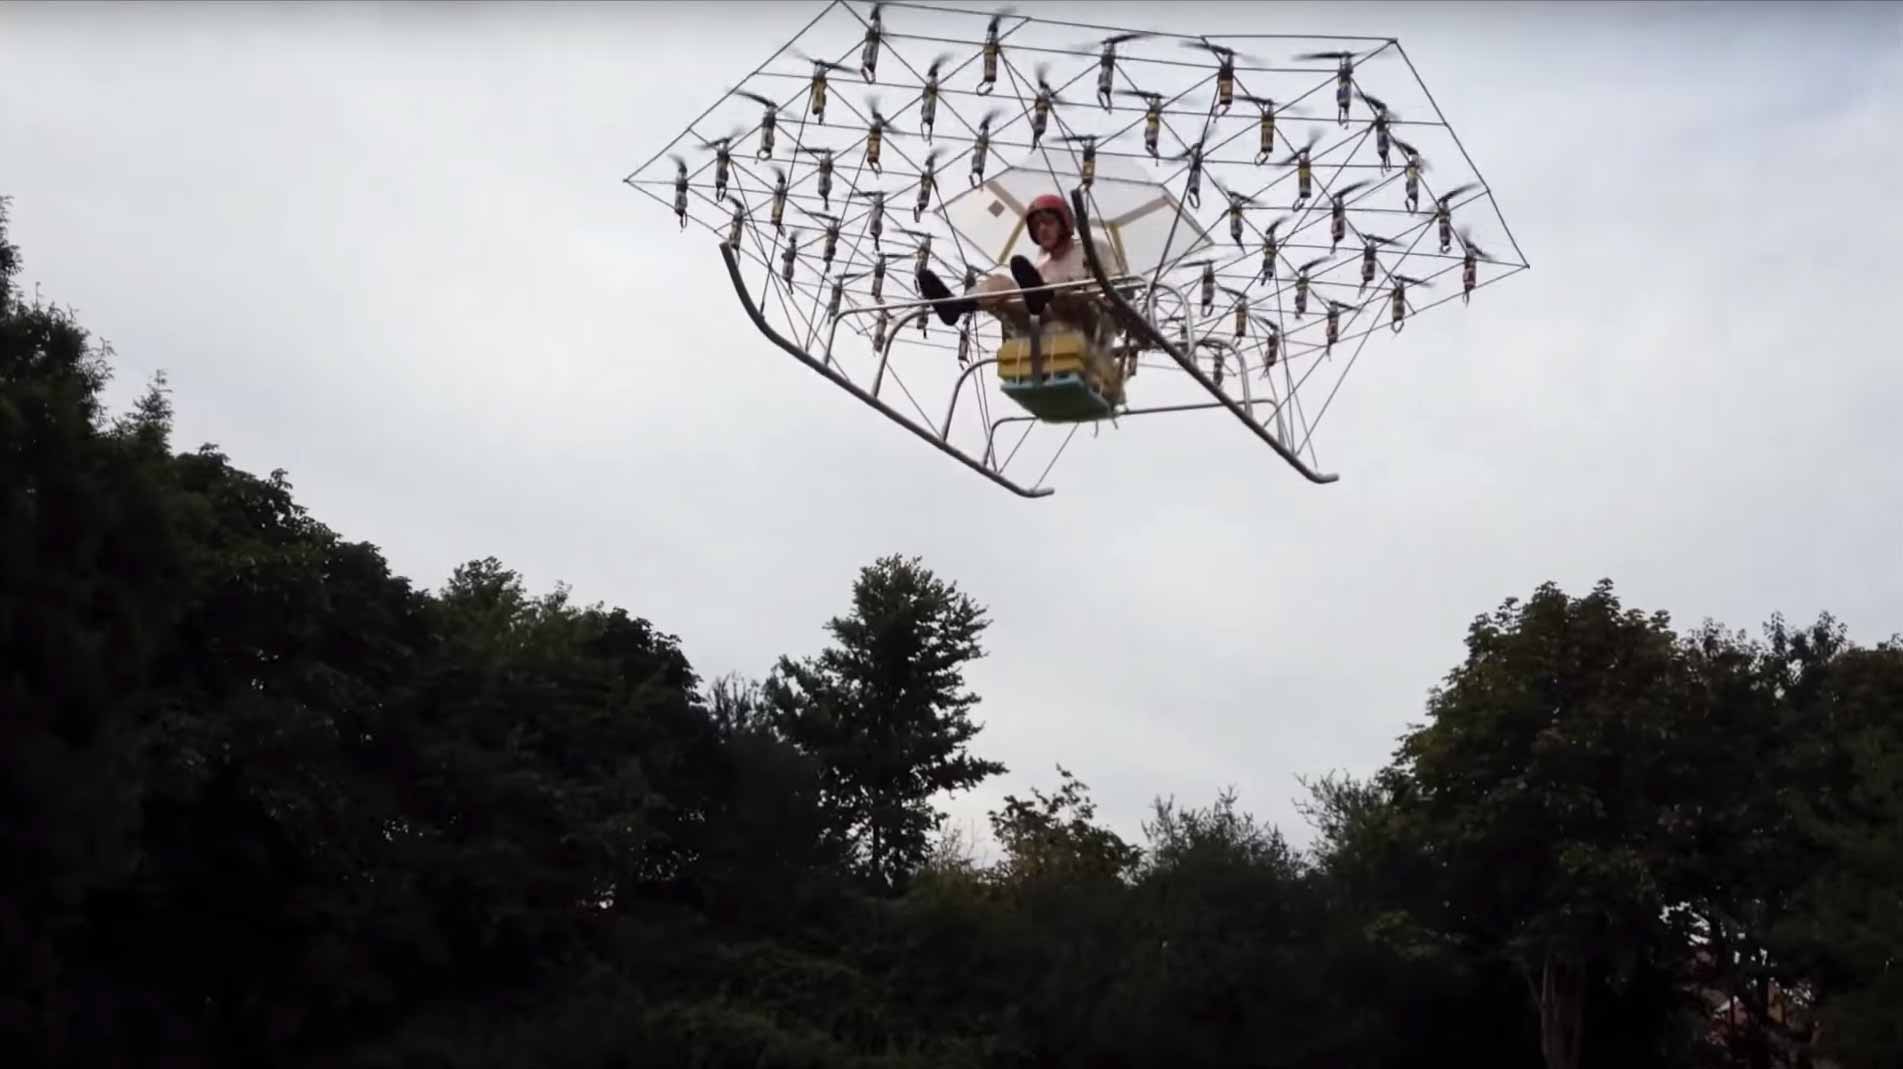 21st Century Aviation Pioneer Takes Off In A 54Propeller Super Drone